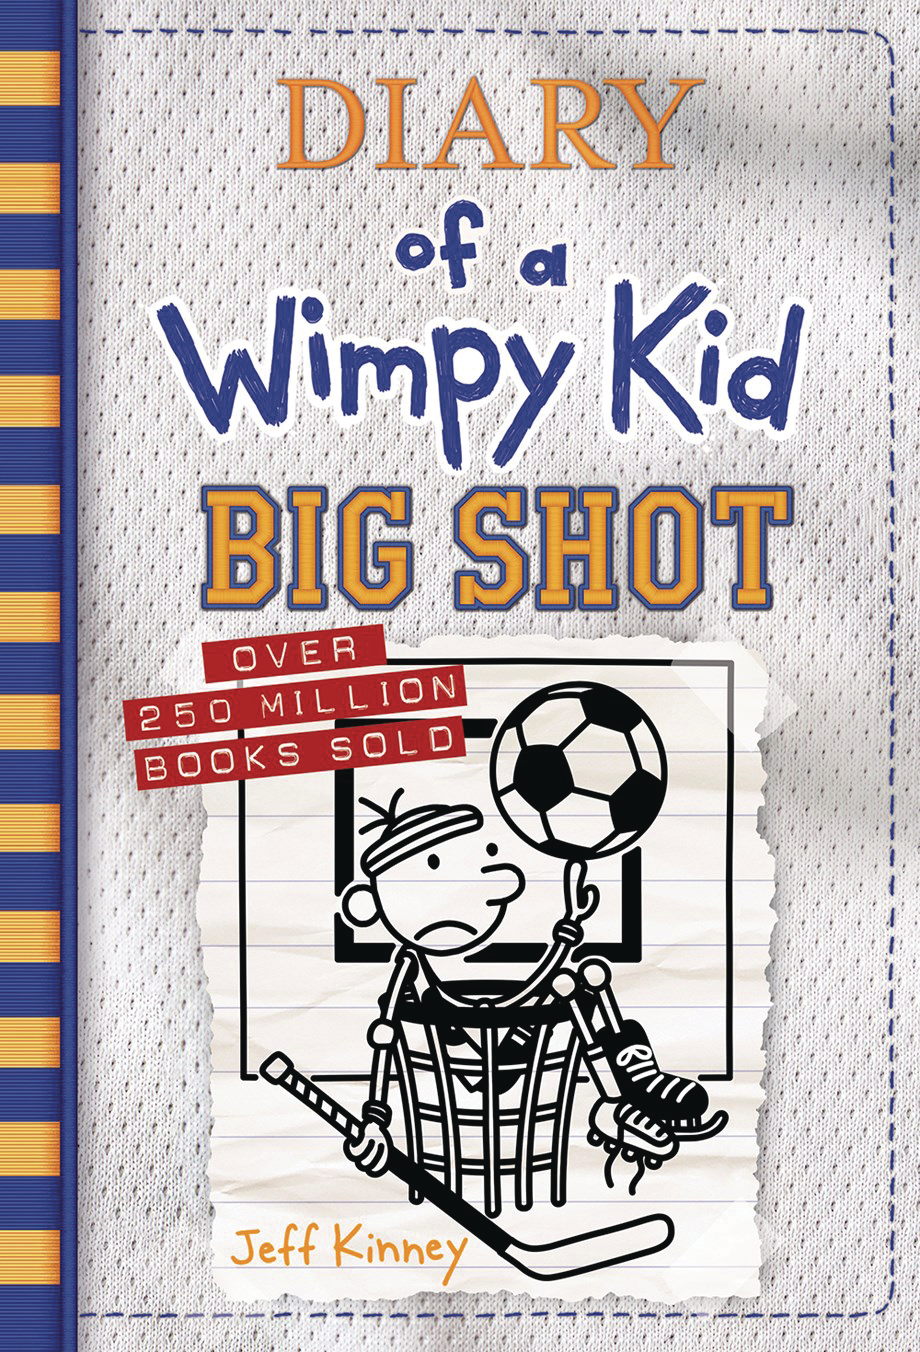 Diary of A Wimpy Kid Hardcover Volume 16 Big Shot